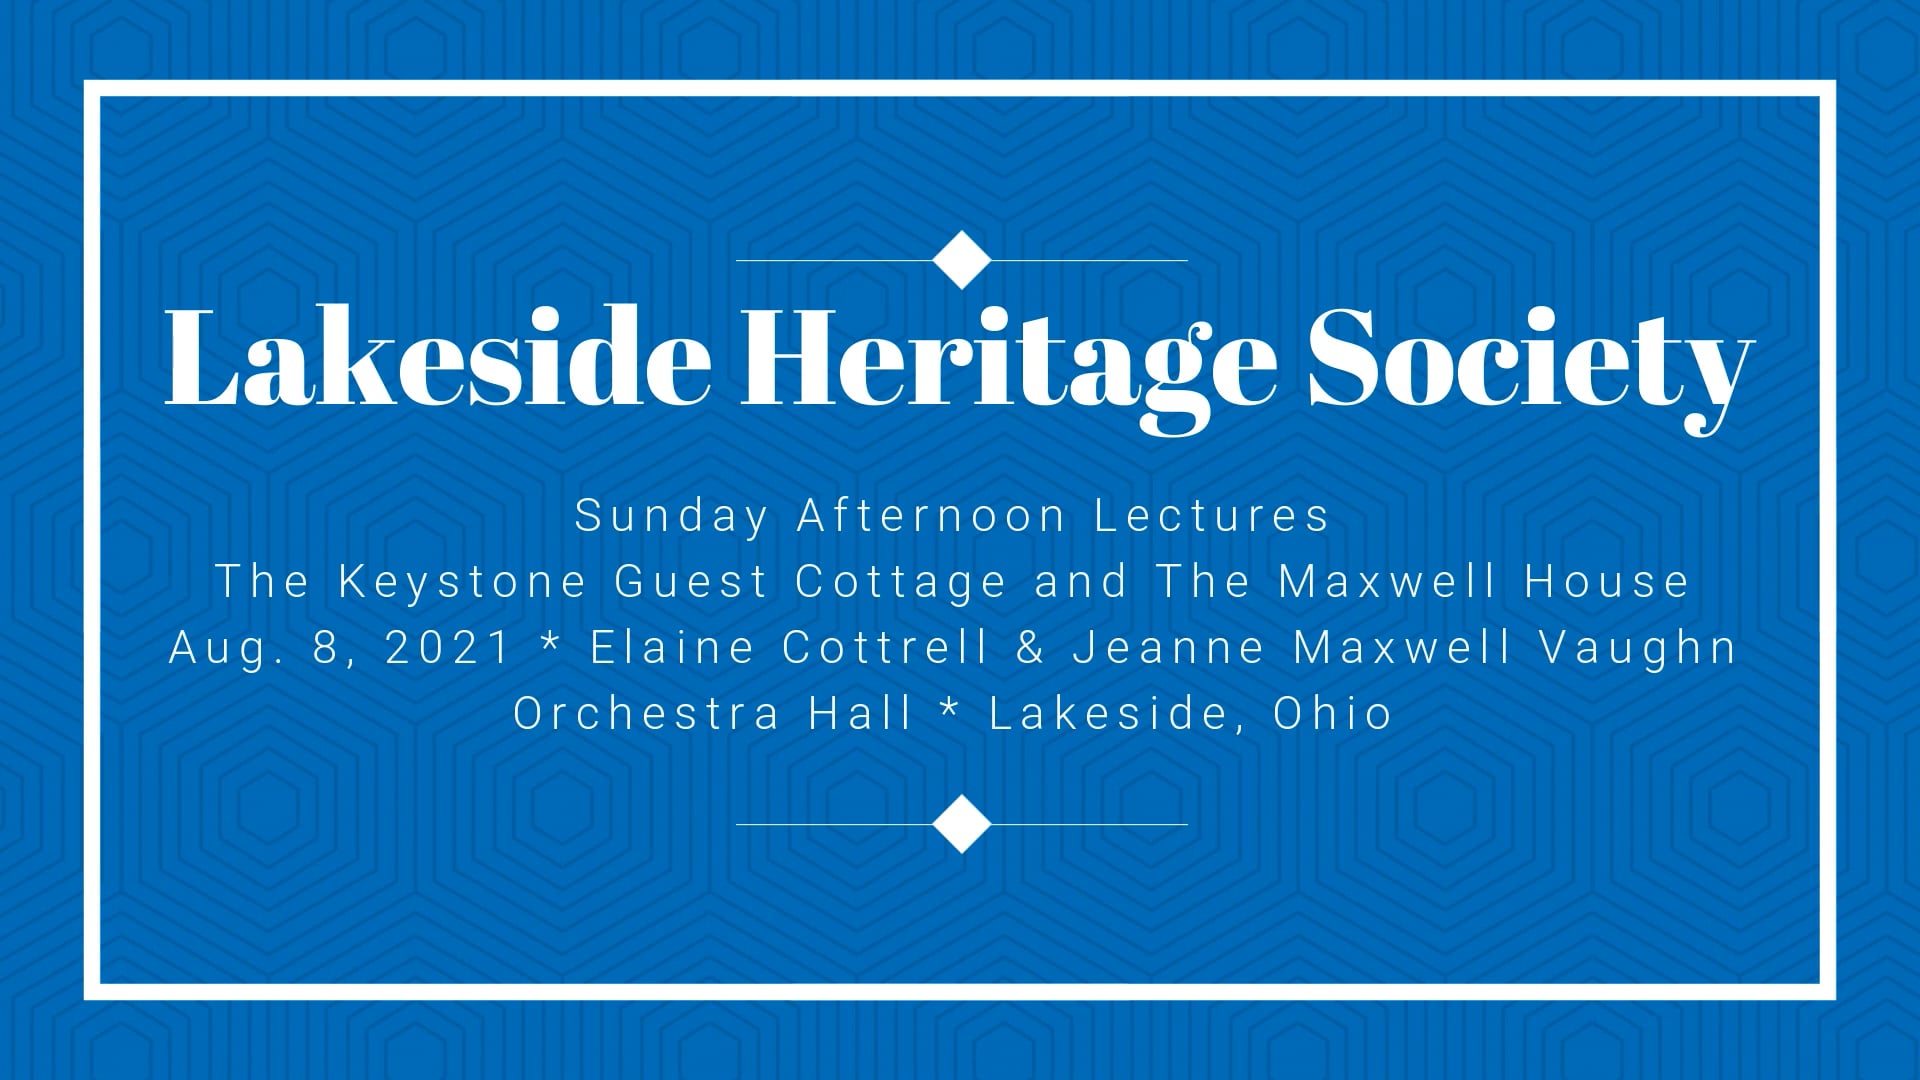 LHS Sunday Lecture August 8, 2021: Keystone Cottage and Maxwell House